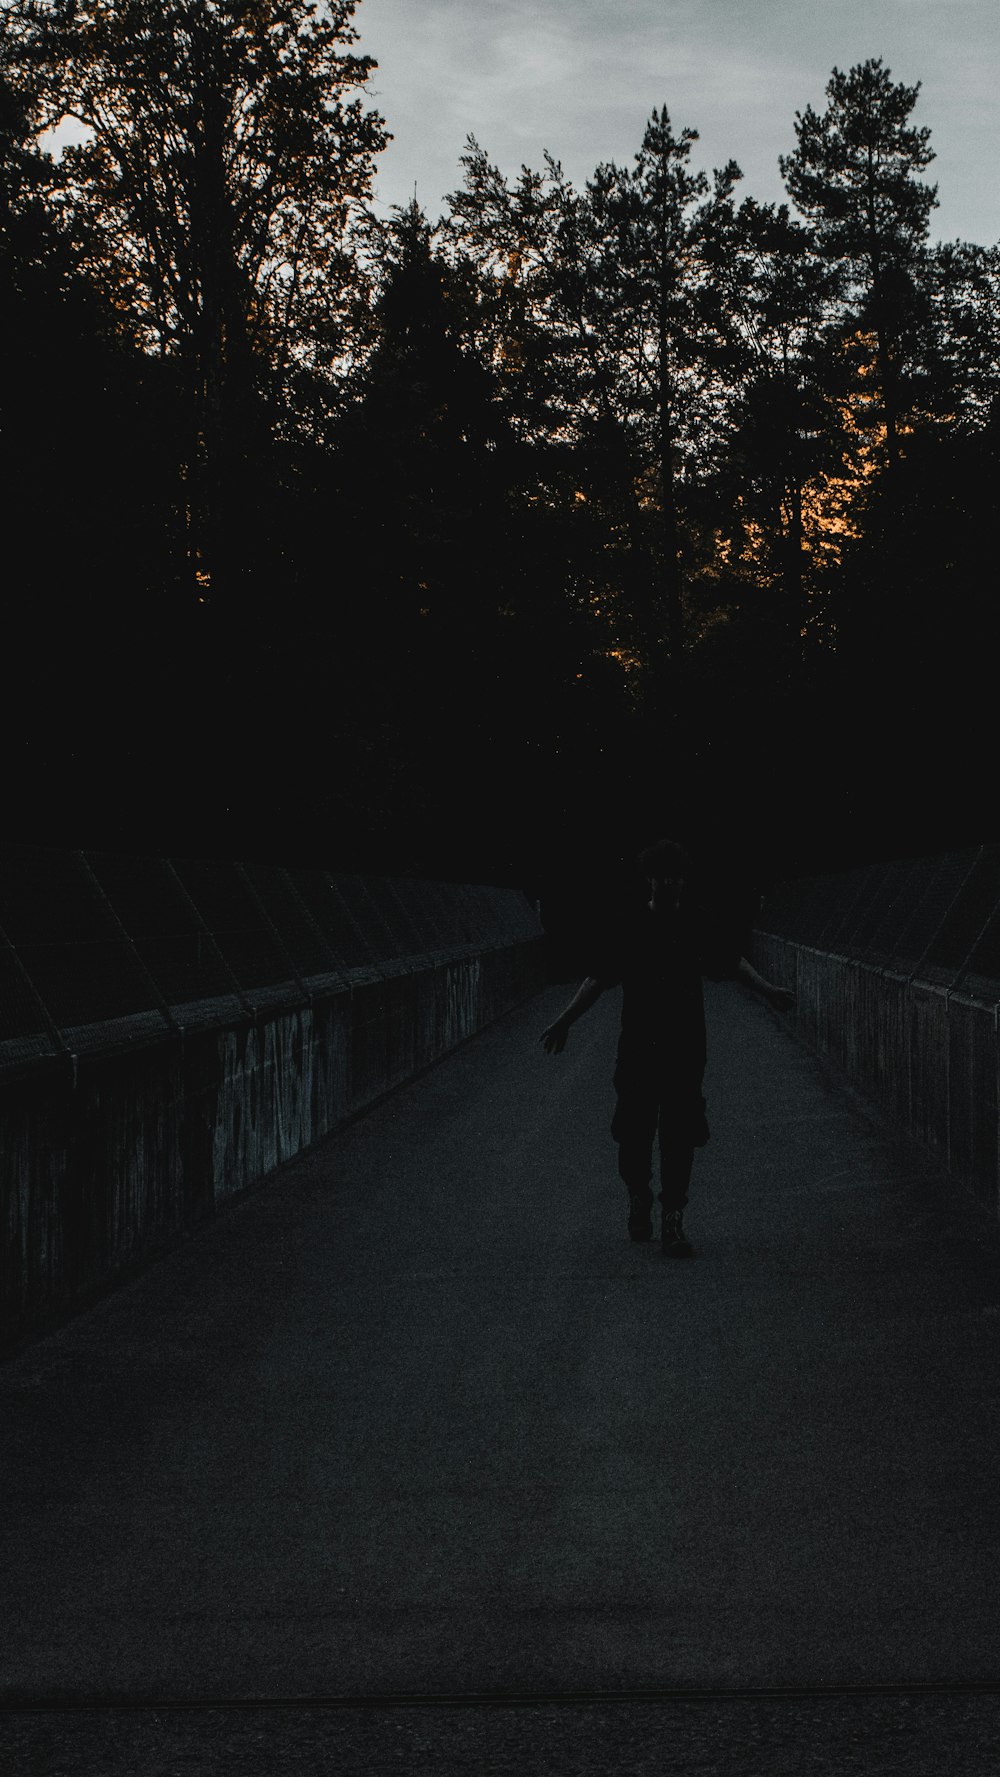 a person walking down a dark path with trees in the background